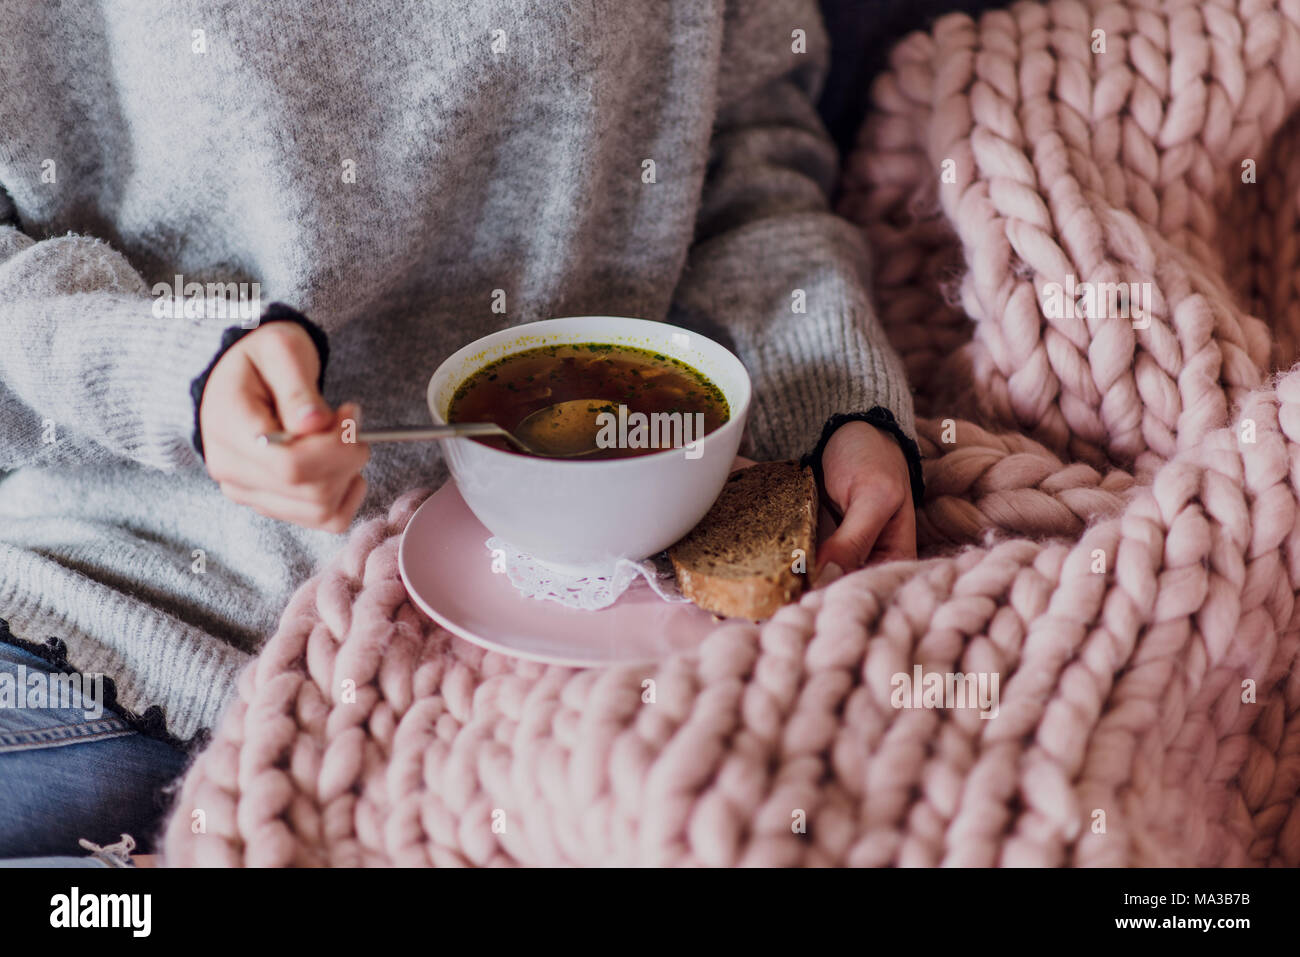 young woman sitting on sofa and eating a soup,detail, Stock Photo